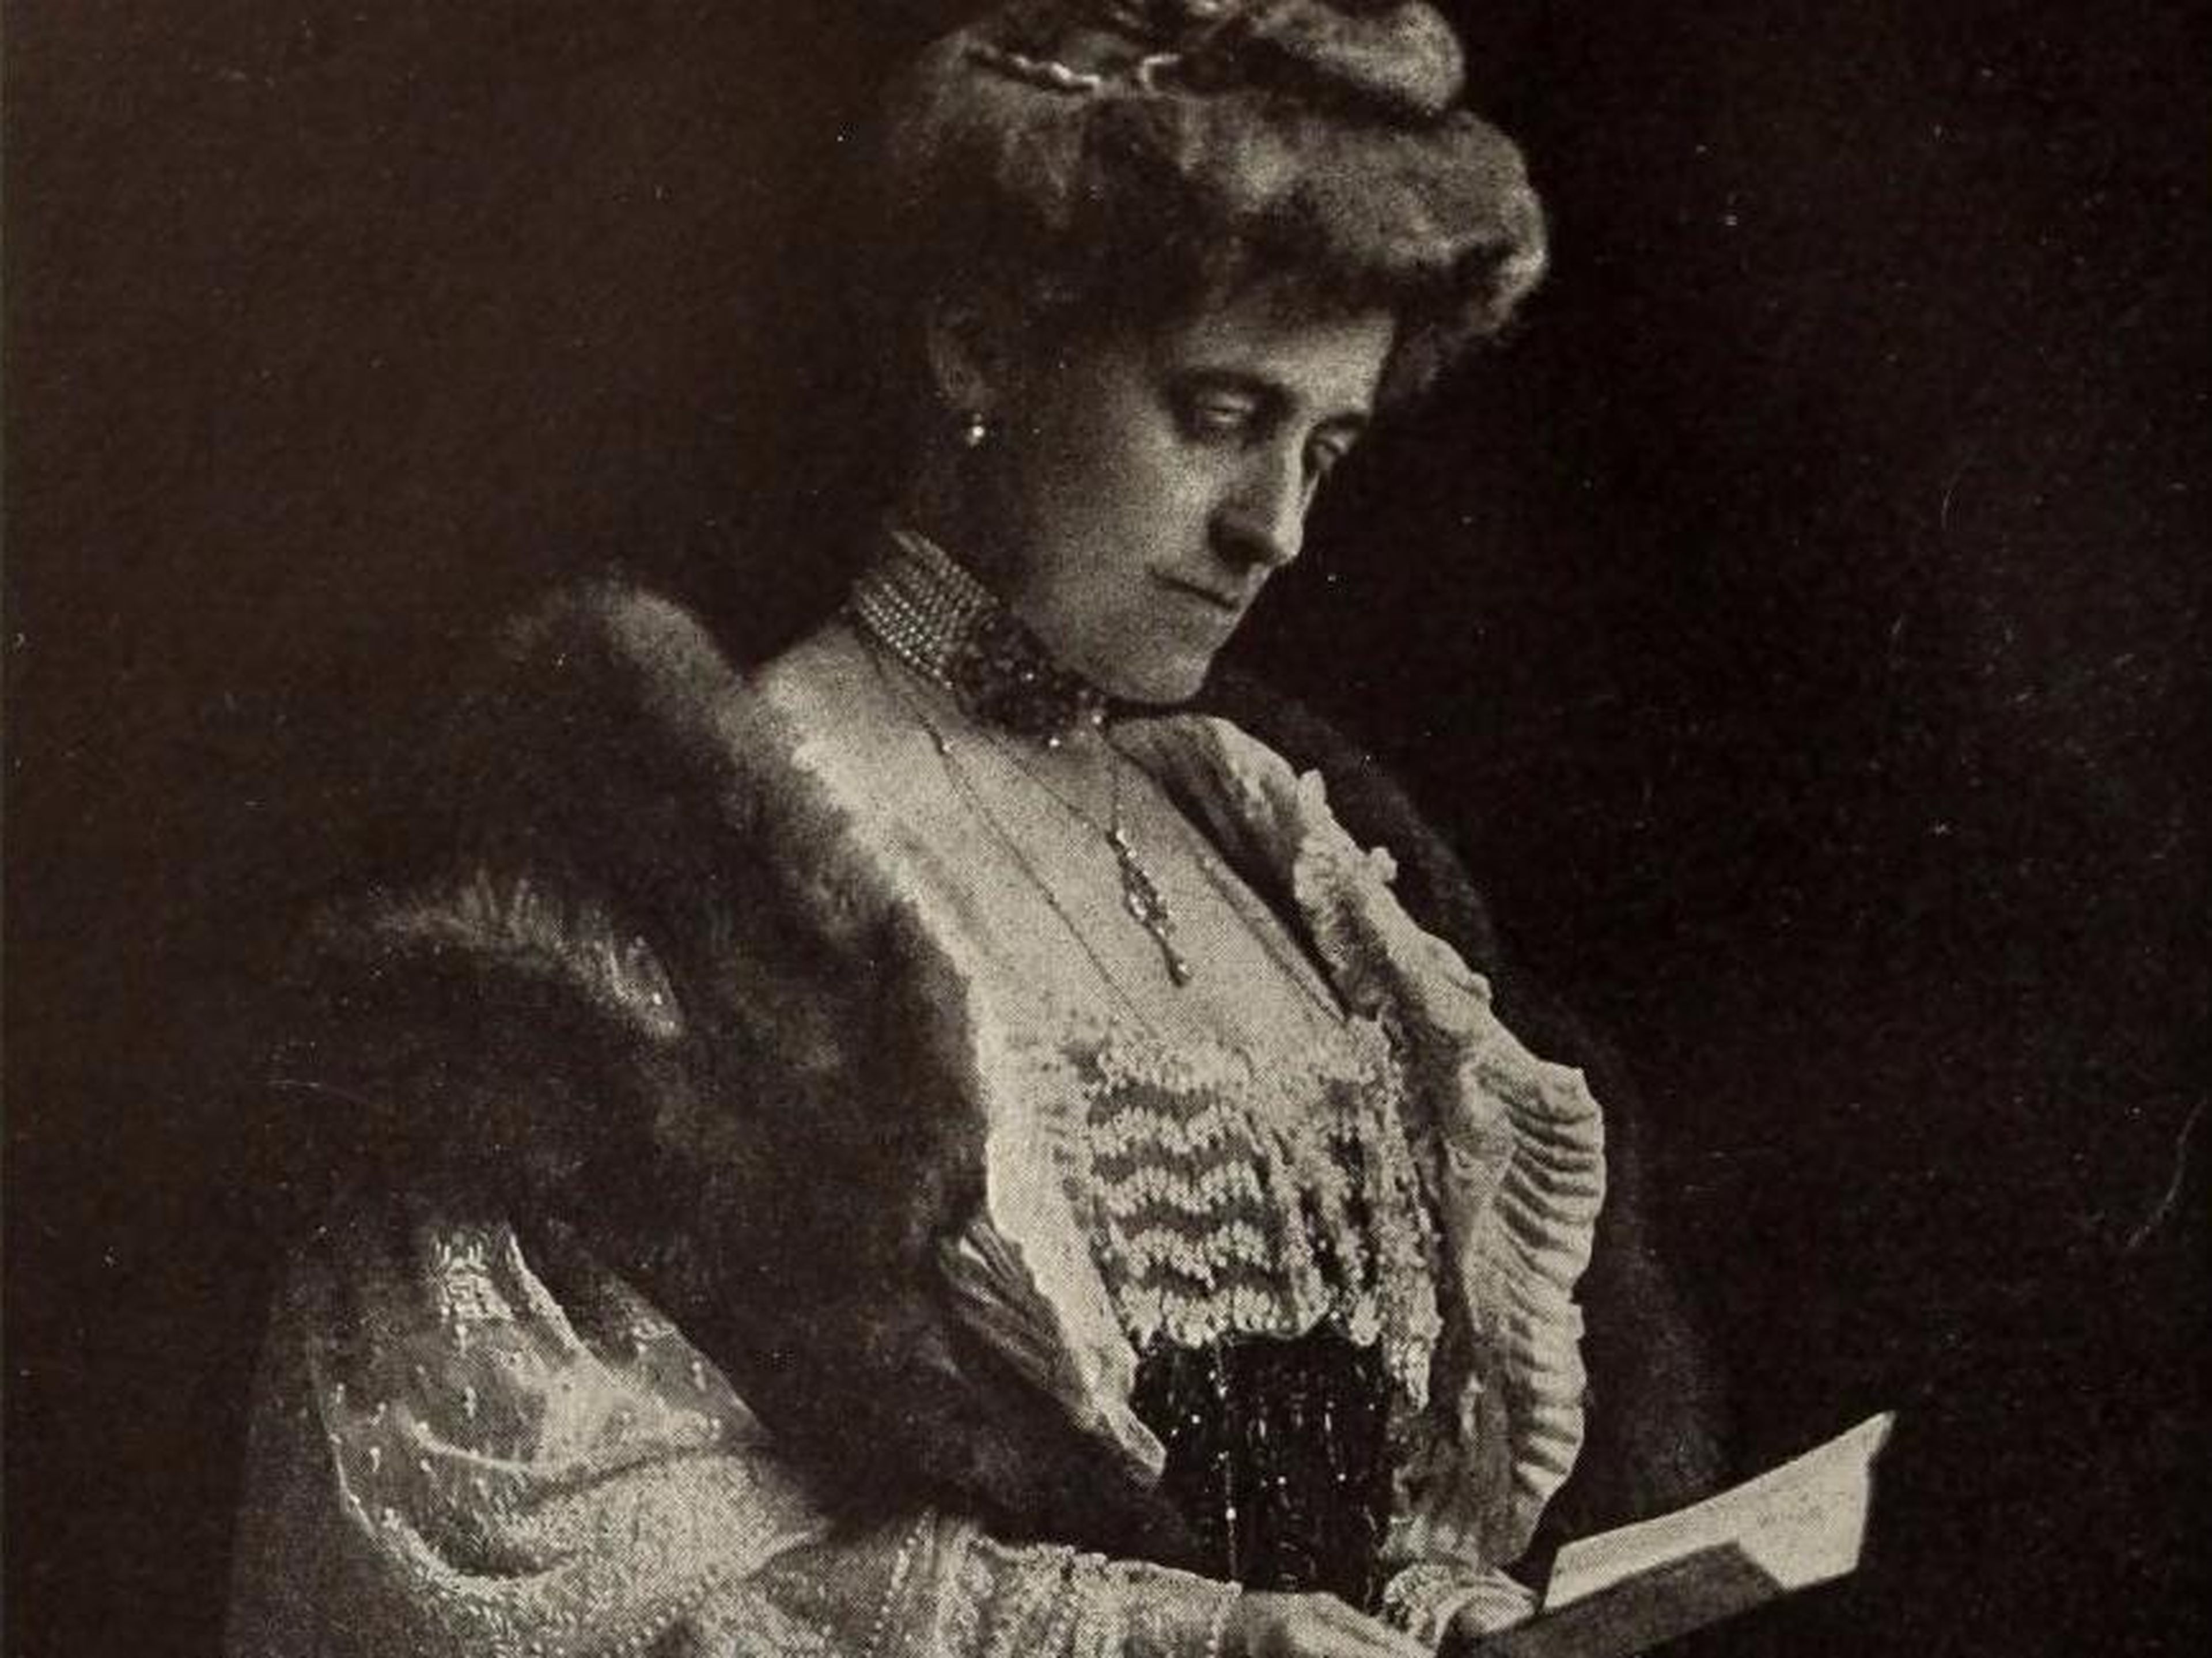 Edith Wharton was the first woman to win the Pulitzer Prize for fiction in 1921.